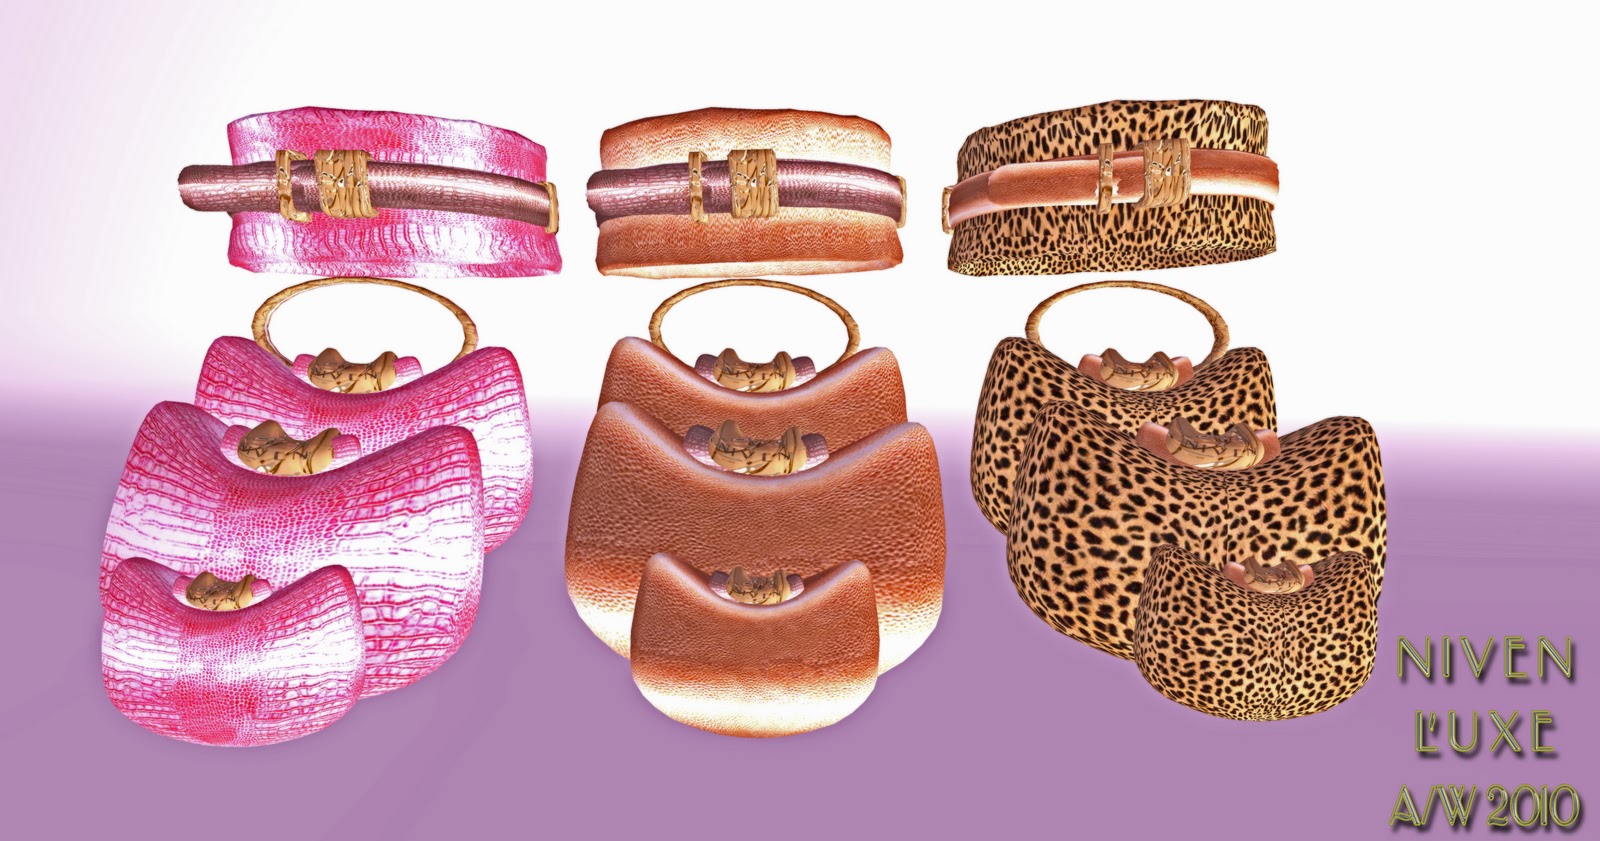 The Digital Image: New At The Niven Collection - Corset Belts and Handbags